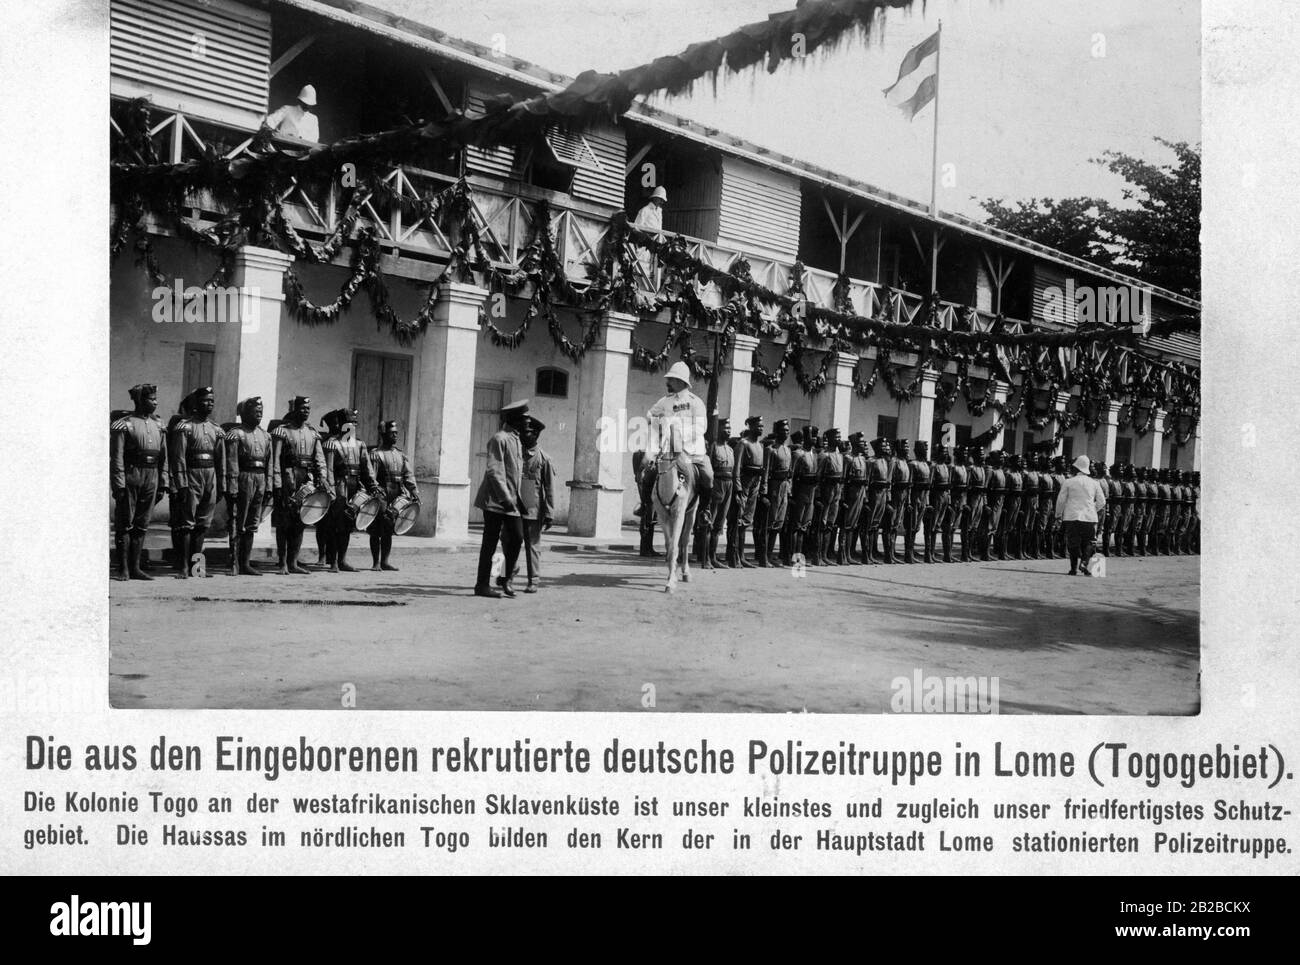 The German police troop recruited from natives in the Togolese capital of Lome in German West Africa. Men from the Haussas tribe in northern Togo form the core of the police force that is based in Lome. Stock Photo